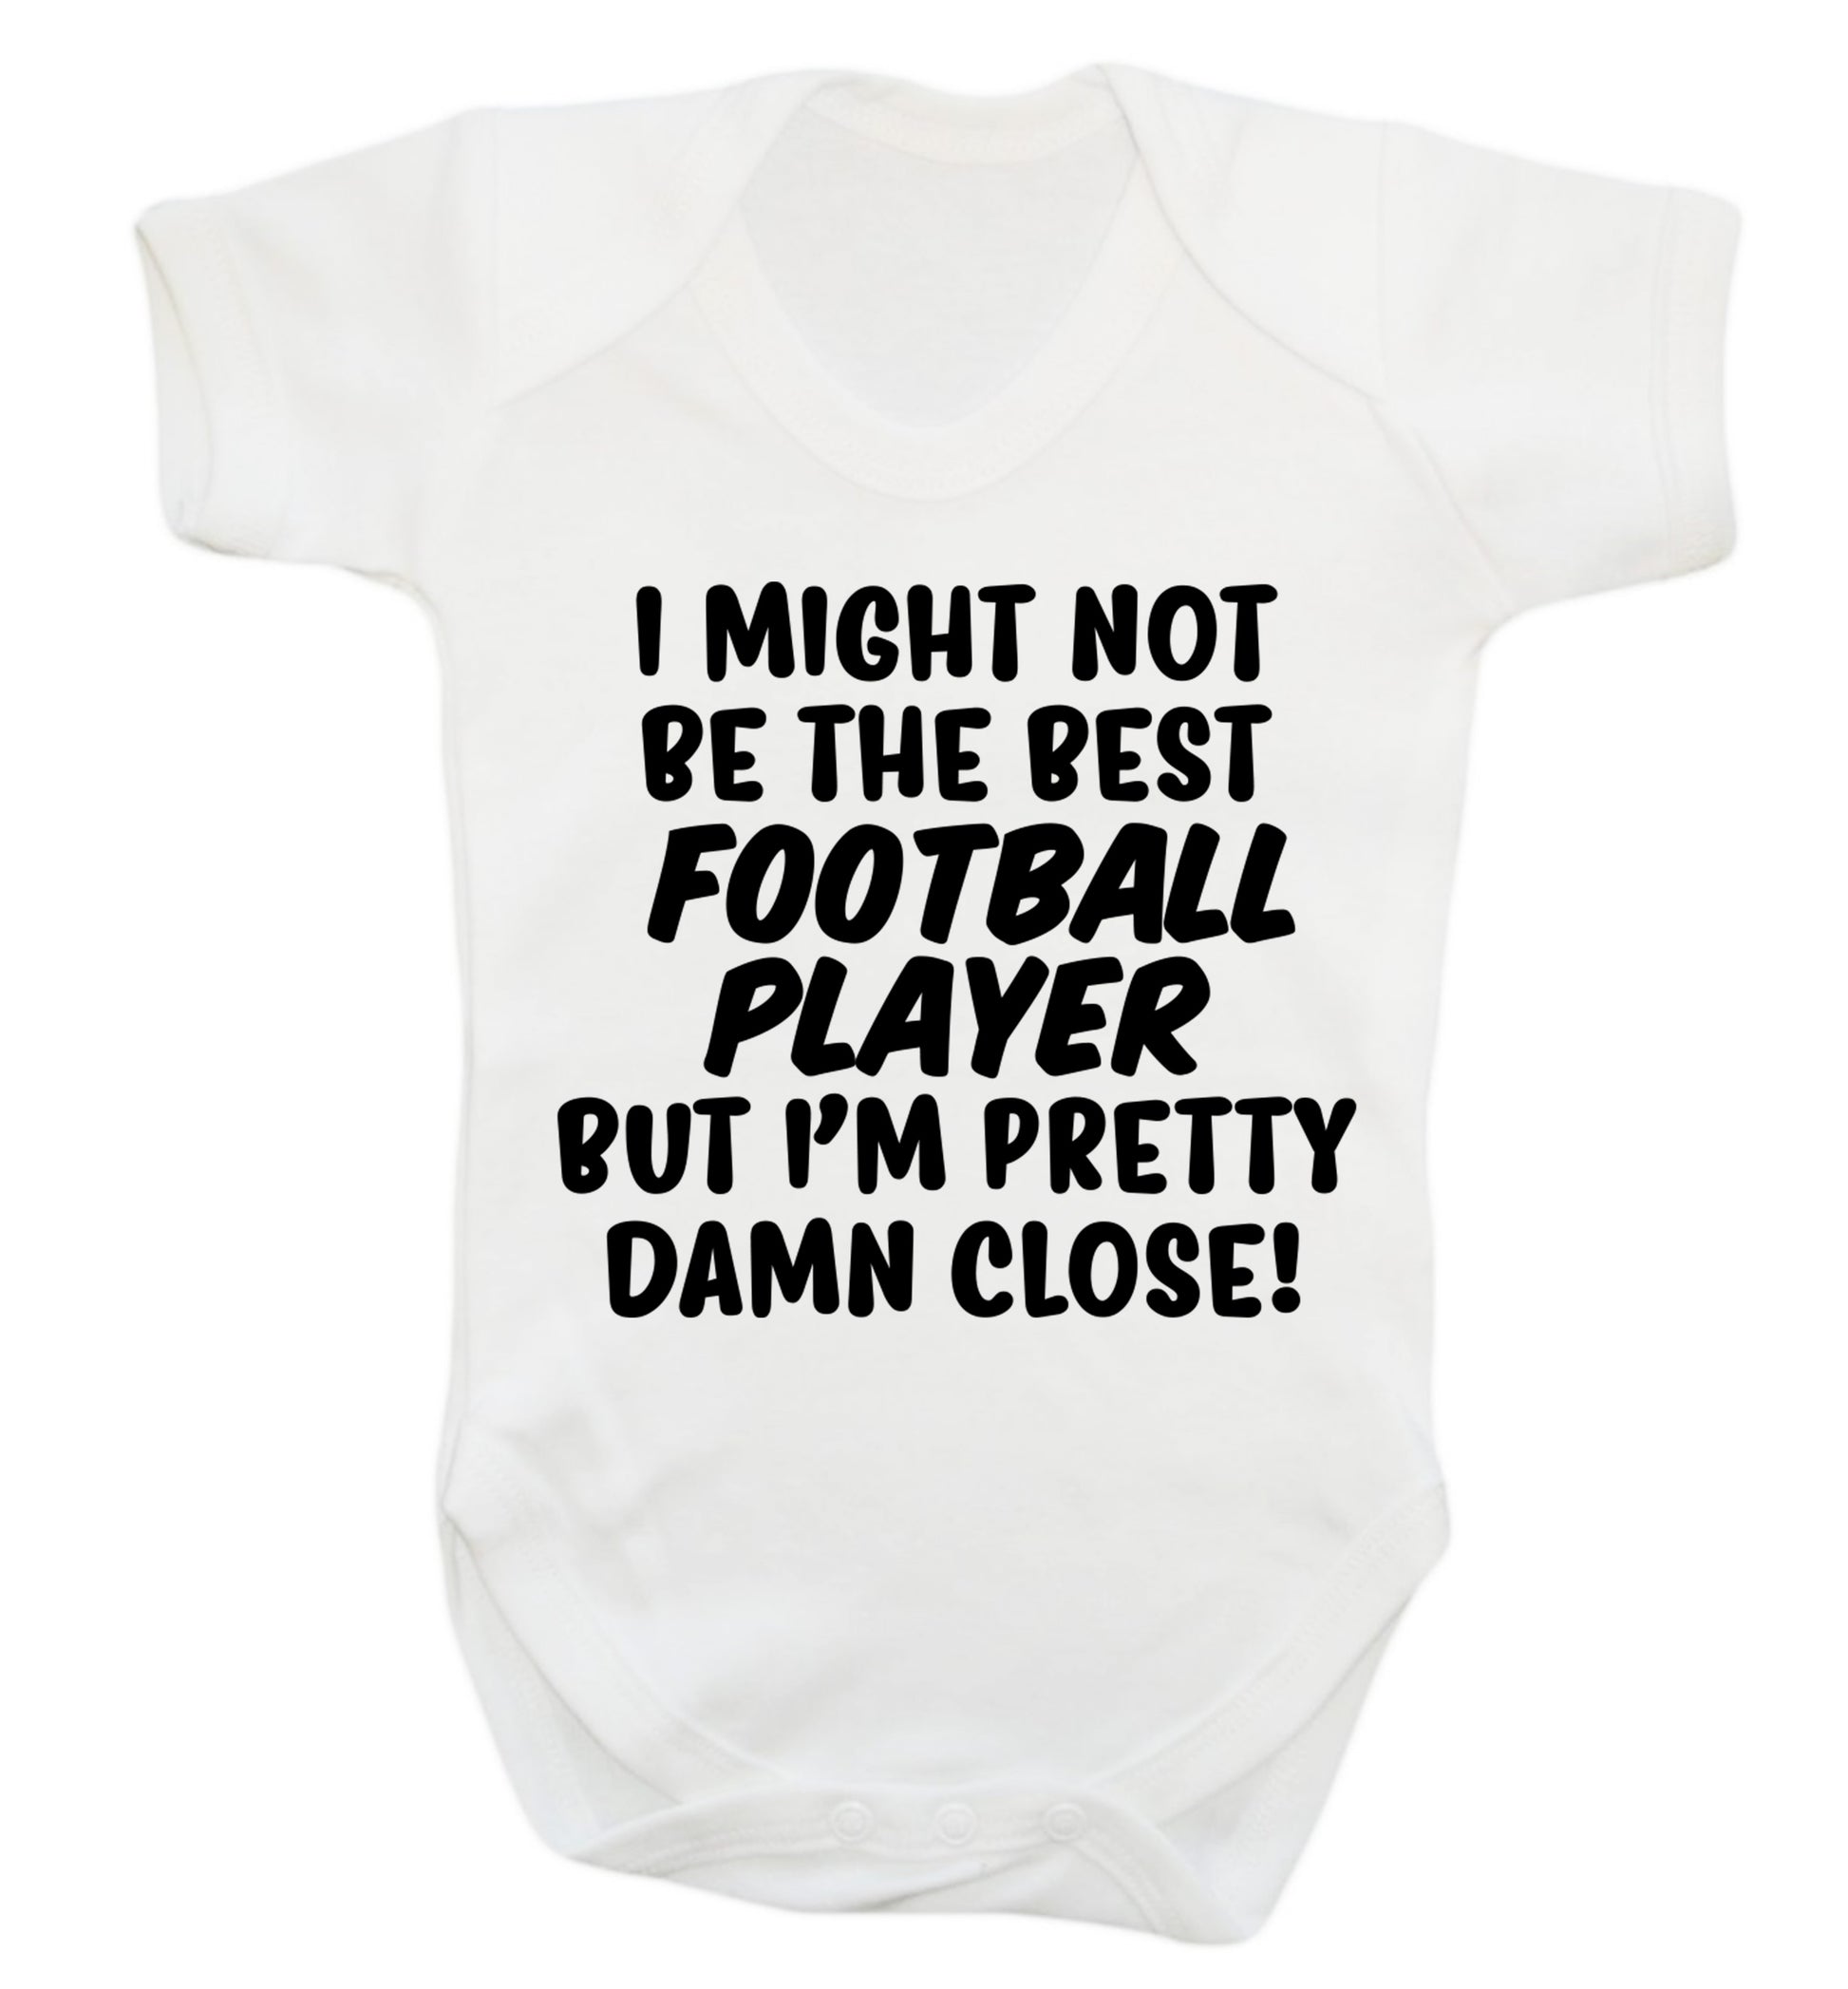 I might not be the best football player but I'm pretty close! Baby Vest white 18-24 months